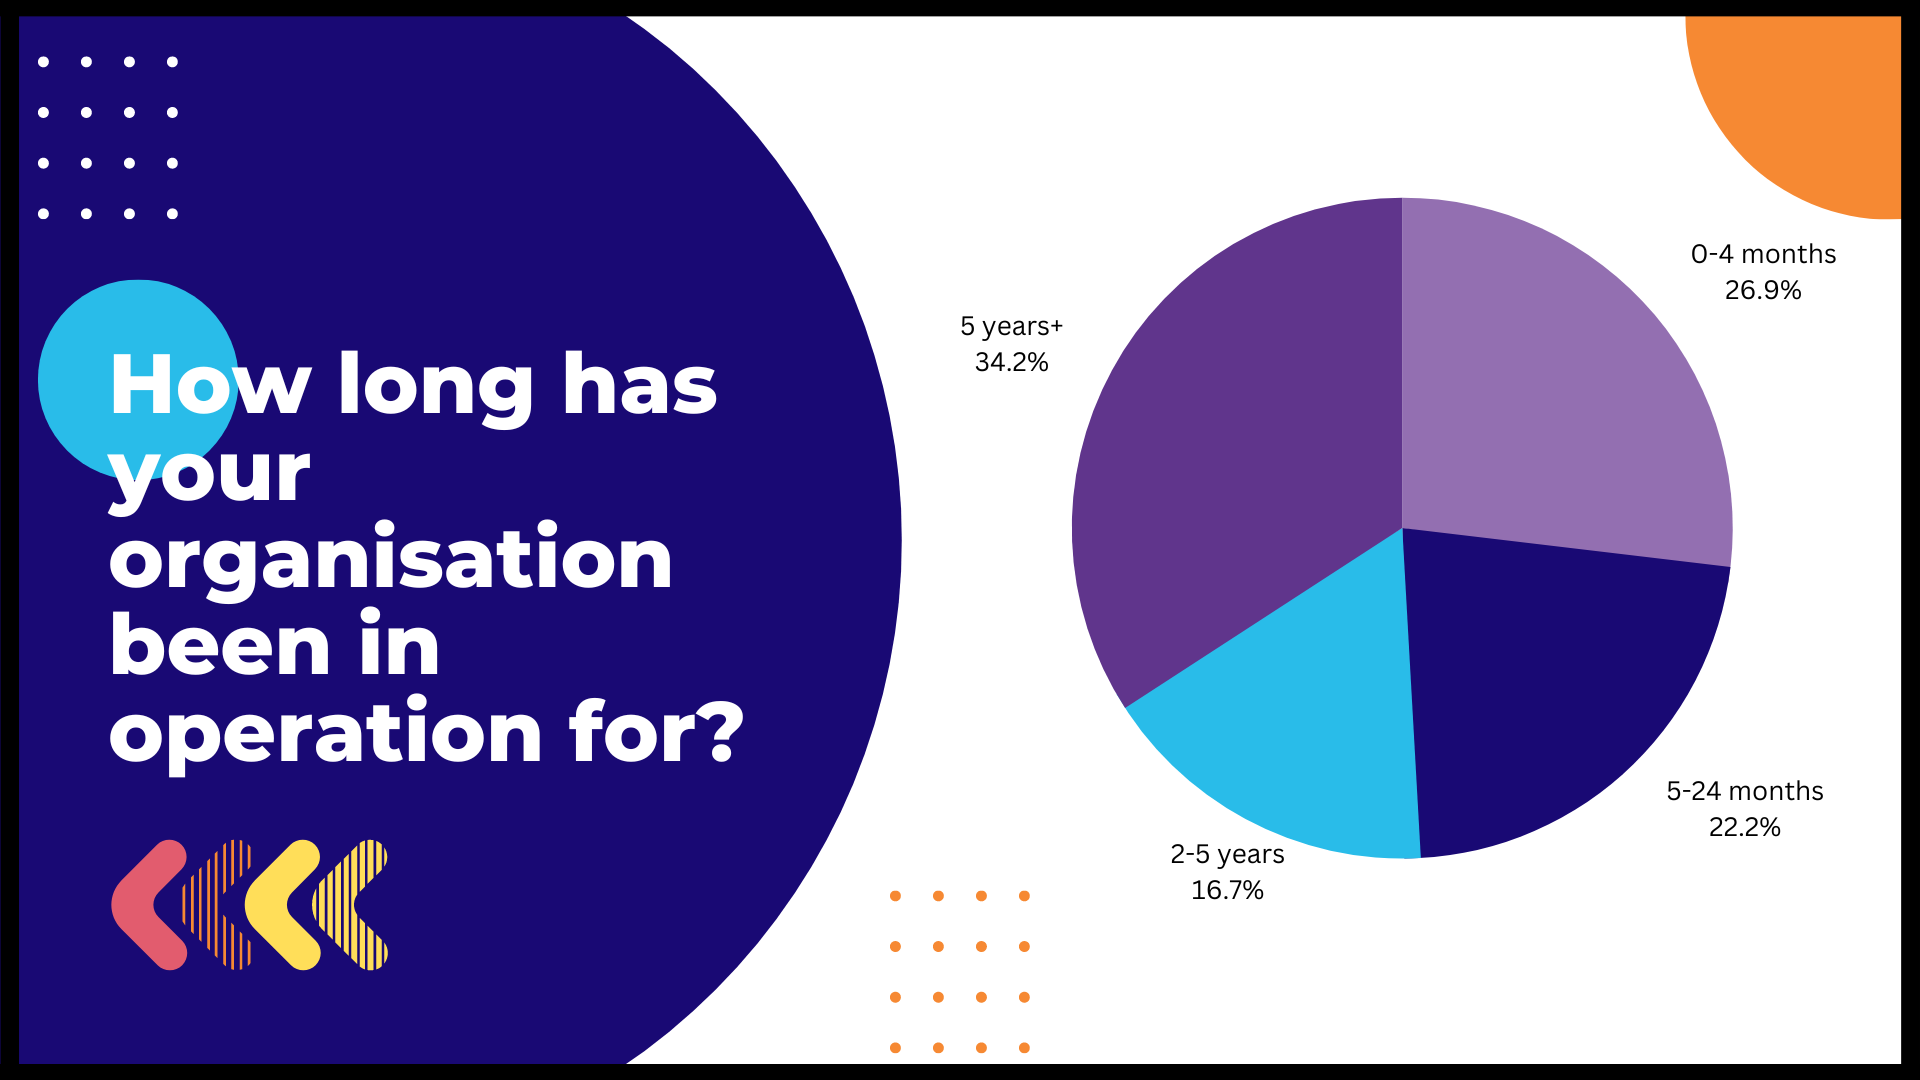 How long has your organisation been in operation for?